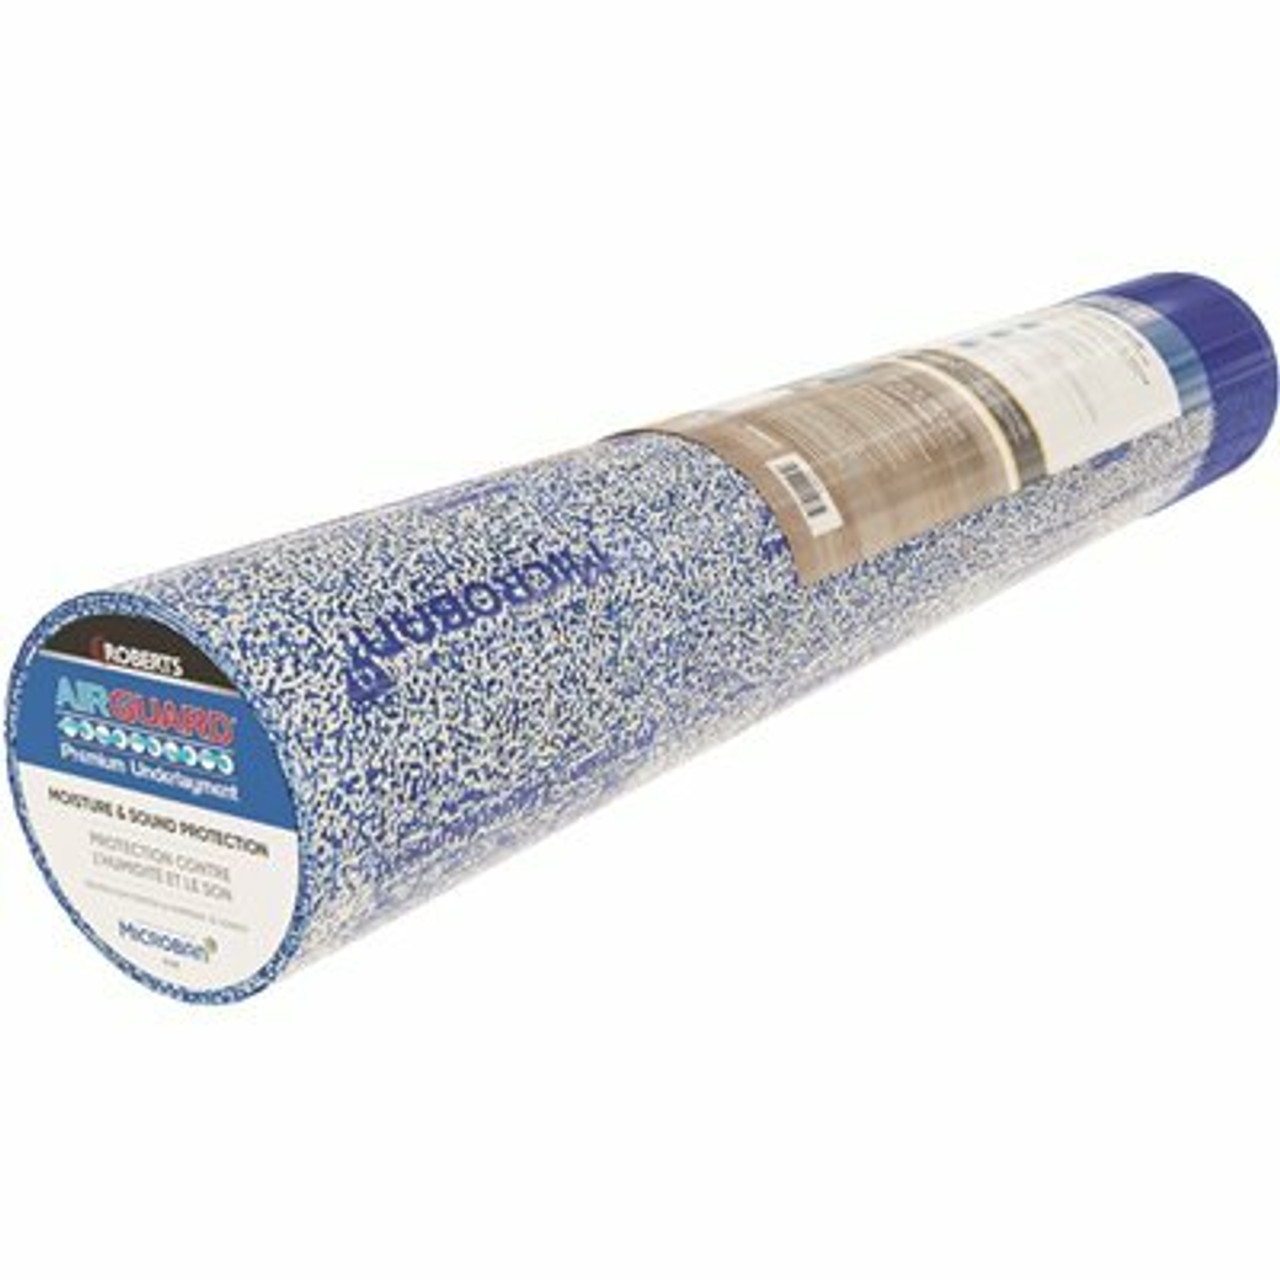 Roberts Airguard 100 Sq. Ft. 40 In. X 30 Ft. X 2 Mm 5-In-1 Underlayment With Microban For Laminate And Engineered Wood Floors